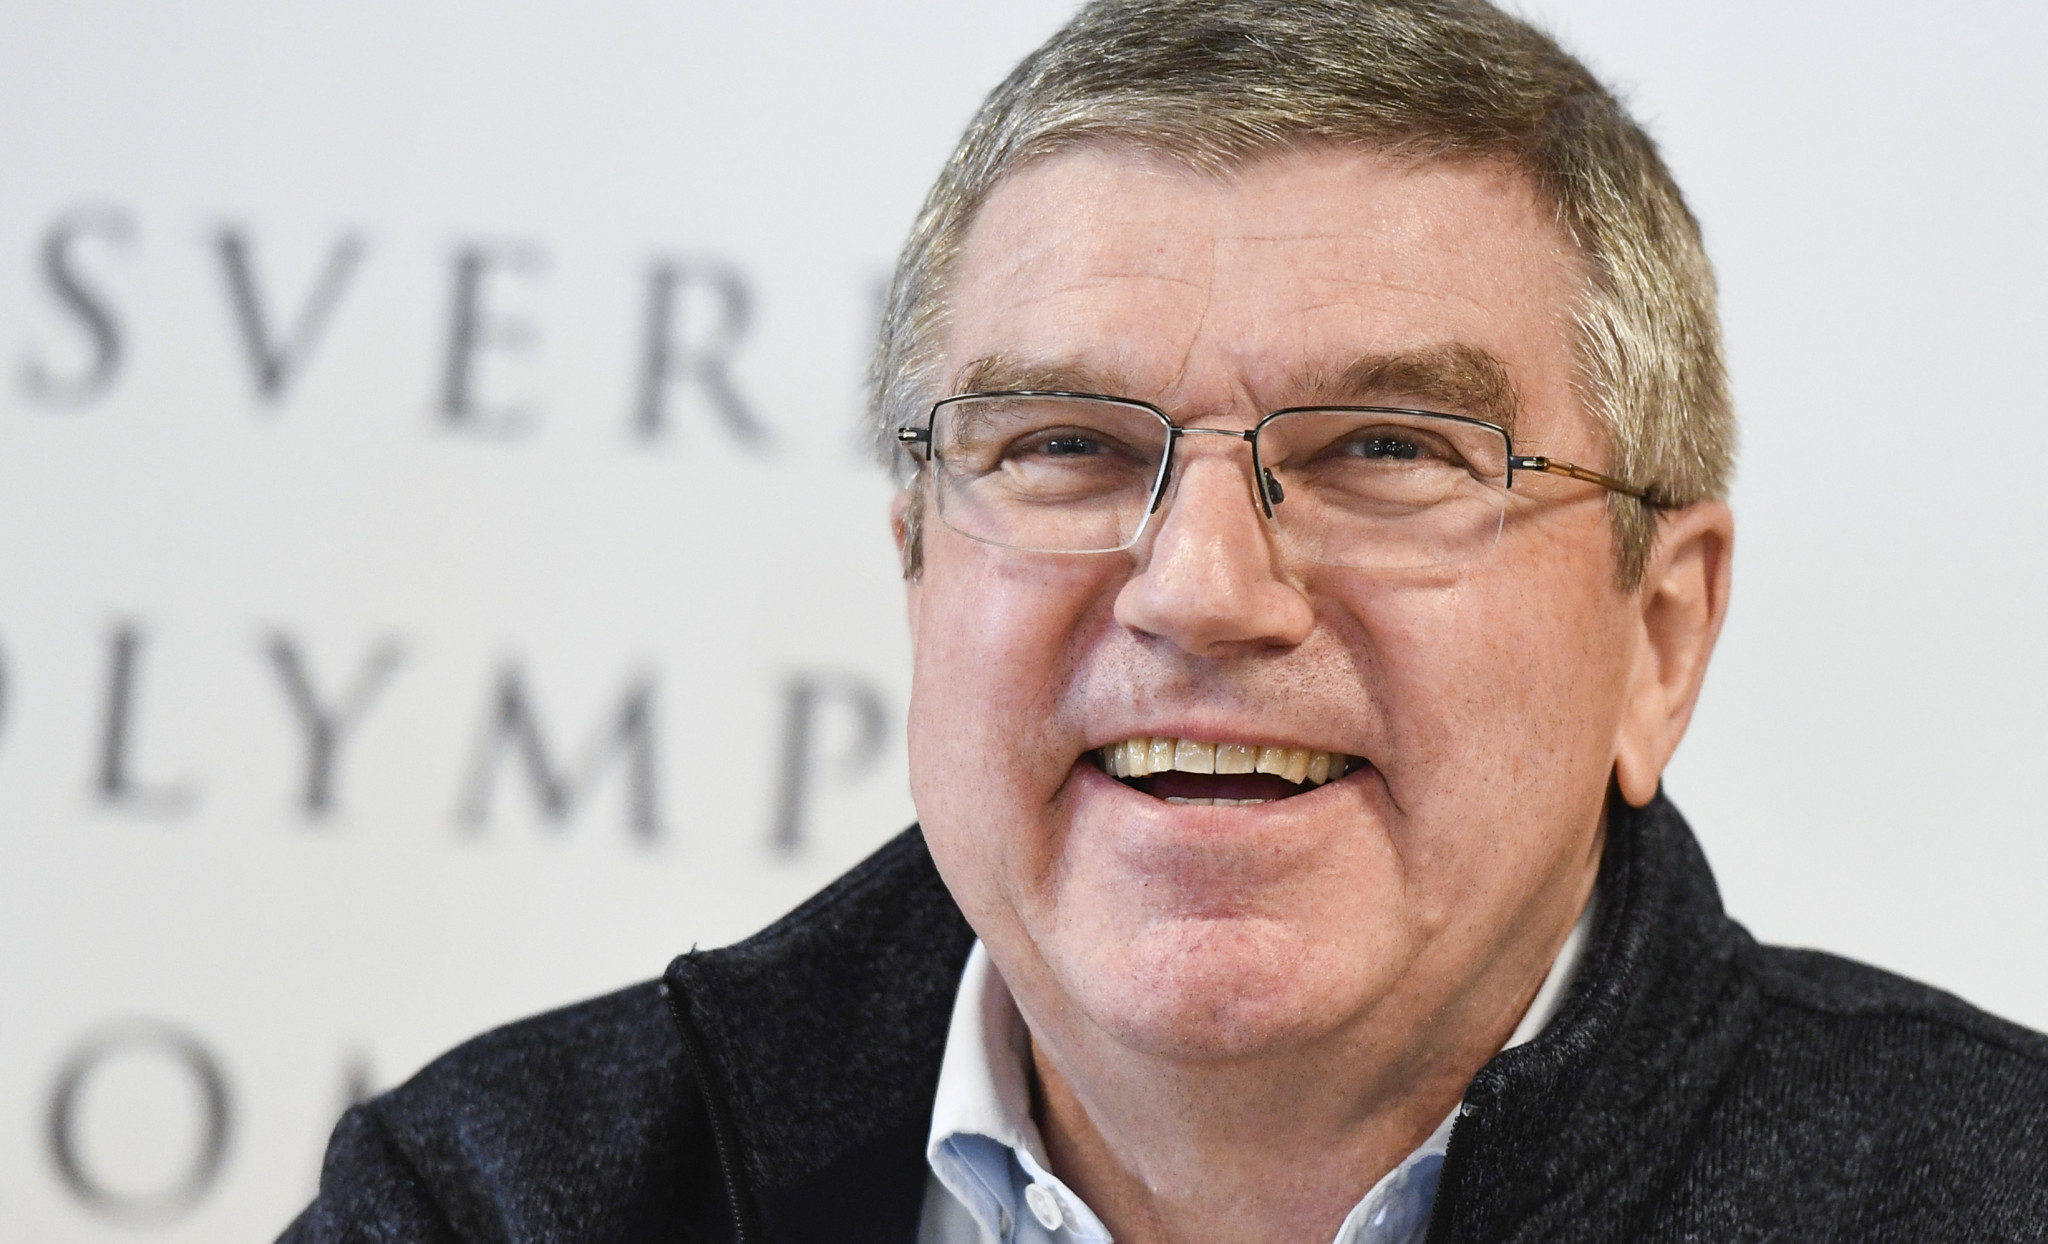 IOC President Thomas Bach said he was confident that the IOC’s Gender Equality Review Project would bring about change ©Getty Images